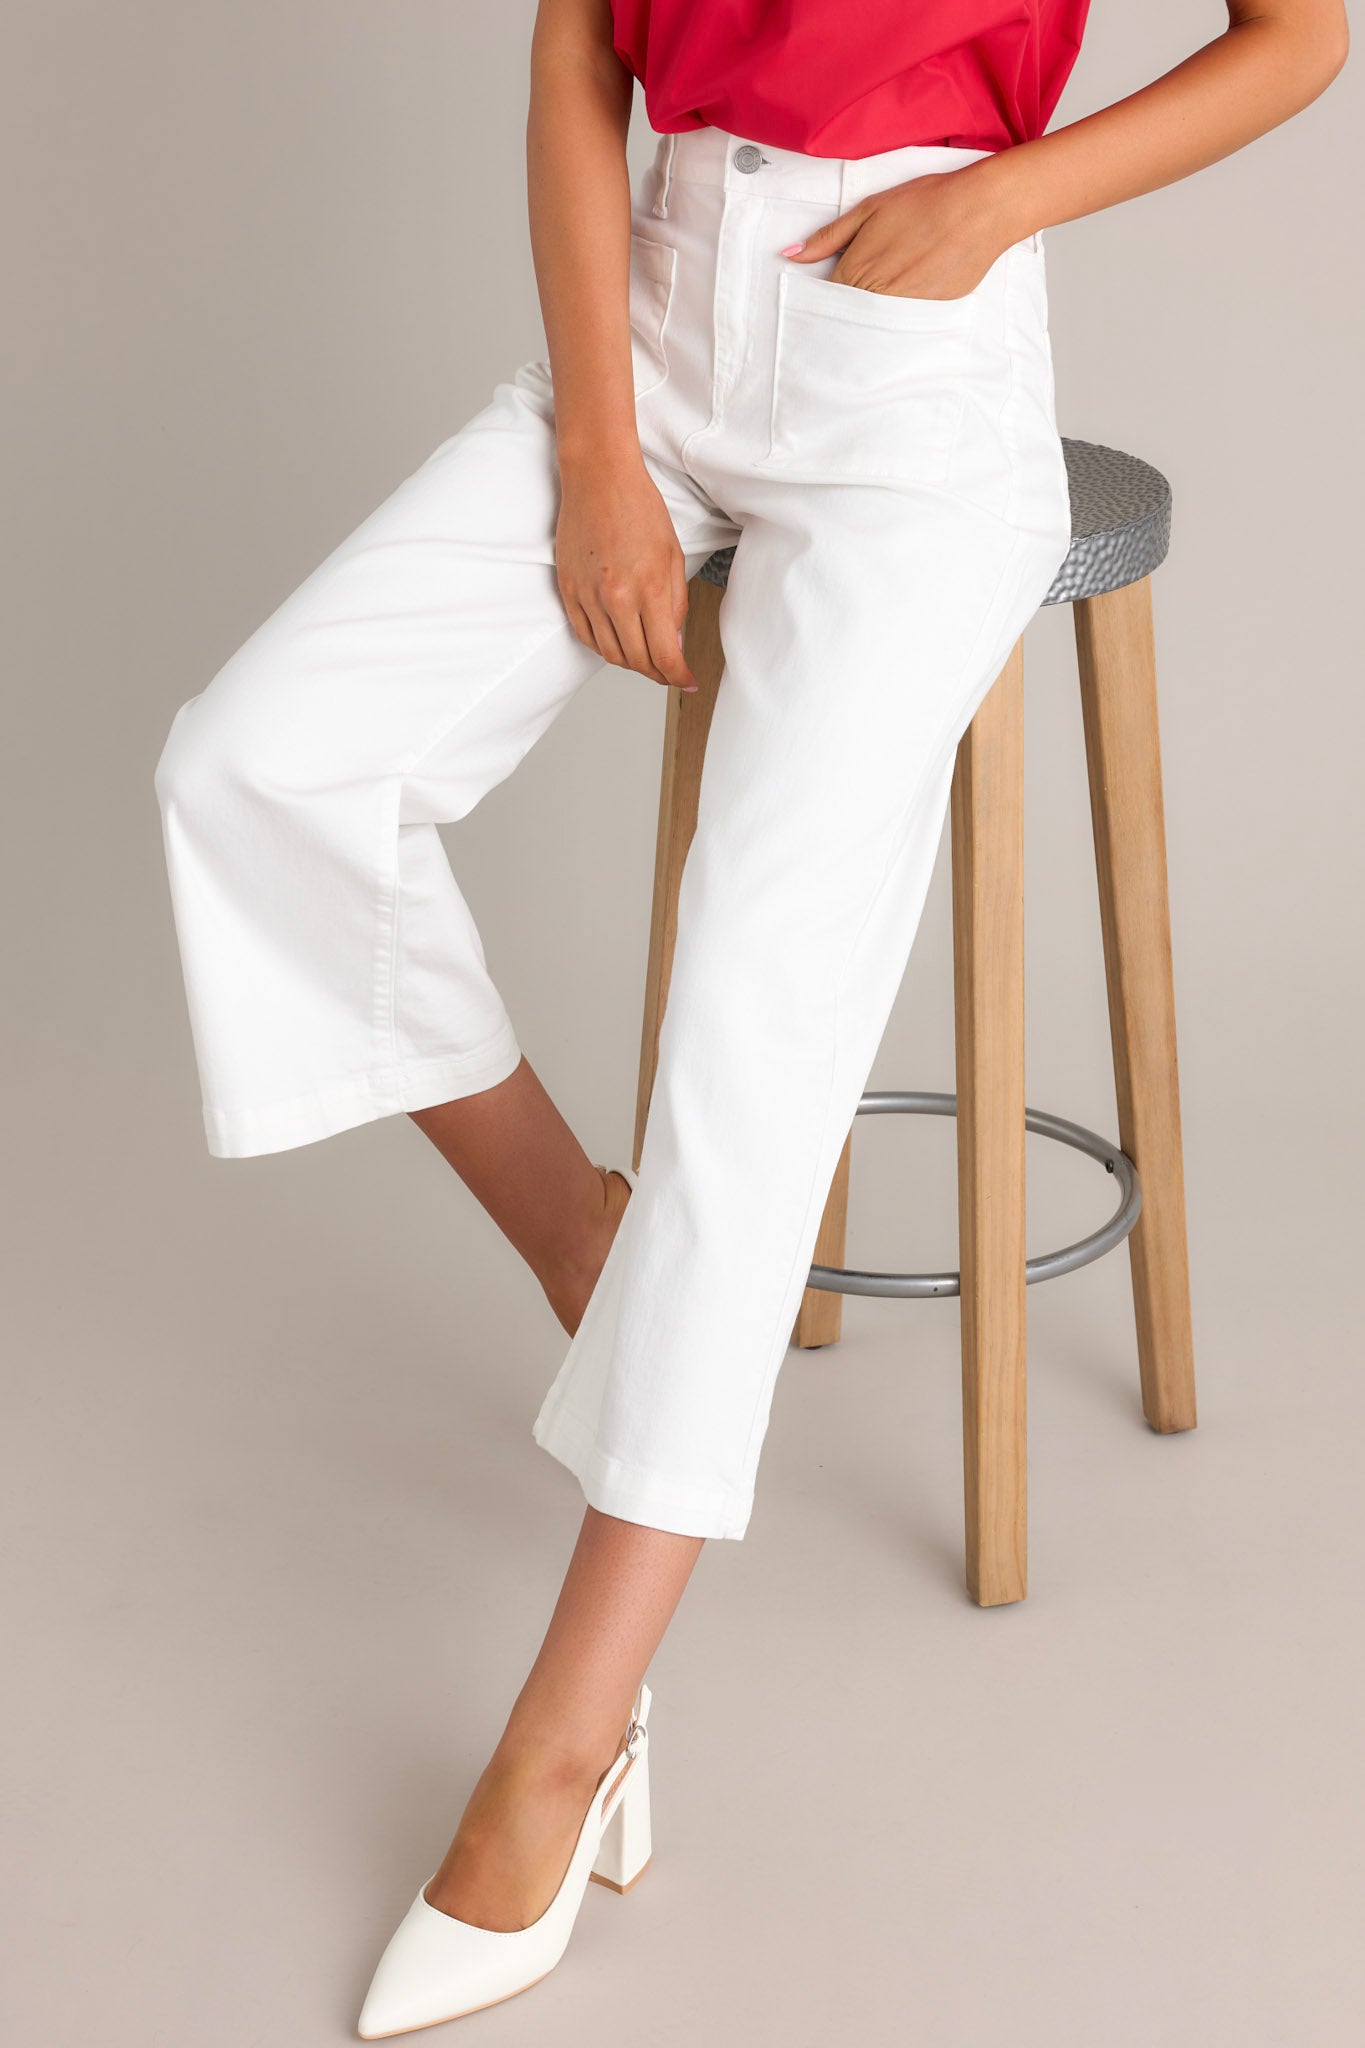 These white jeans feature a high waisted design, a button & zipper closure, belt loops, functional front & back pockets, a cropped hemline, and a flared leg.